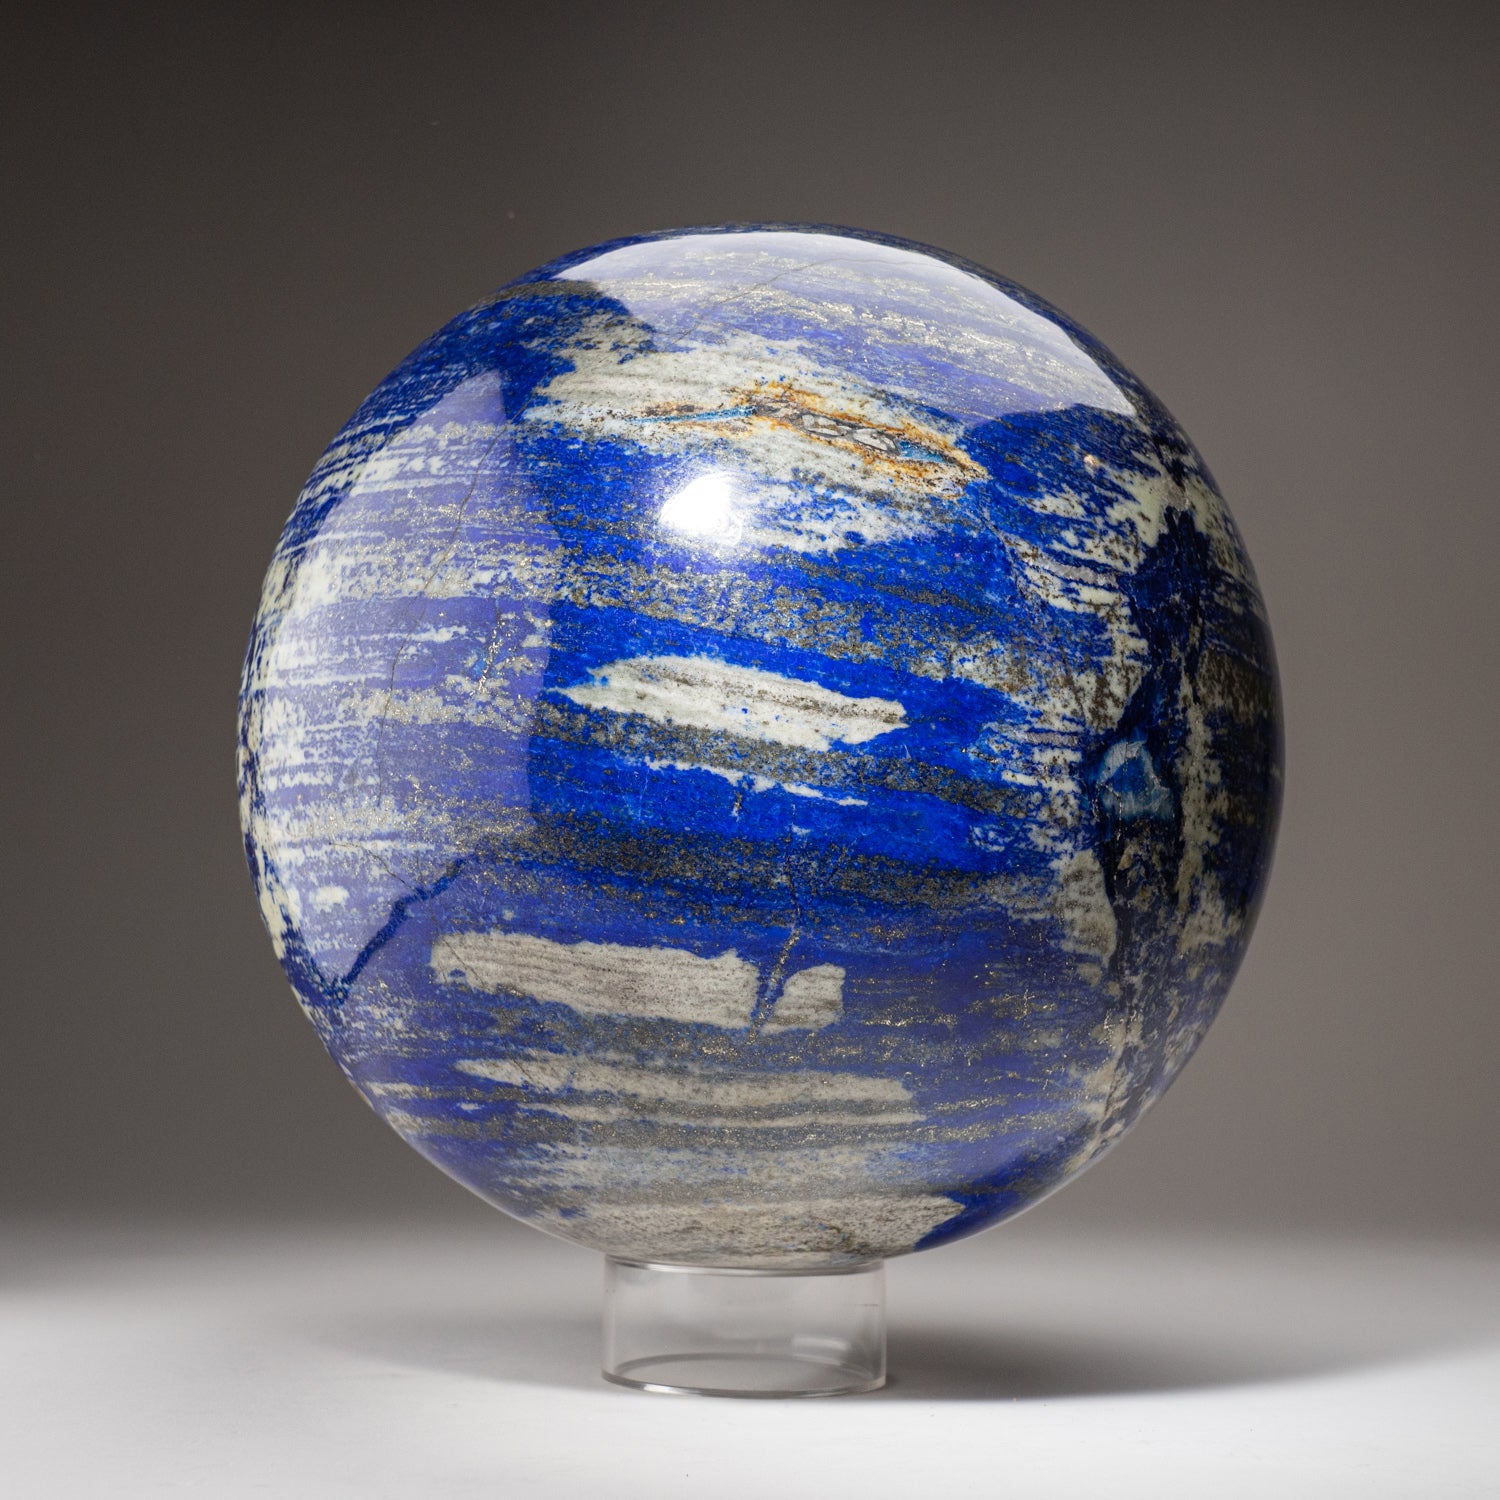 Genuine Polished Lapis Lazuli Sphere from Afghanistan (12", 77.5 lbs)